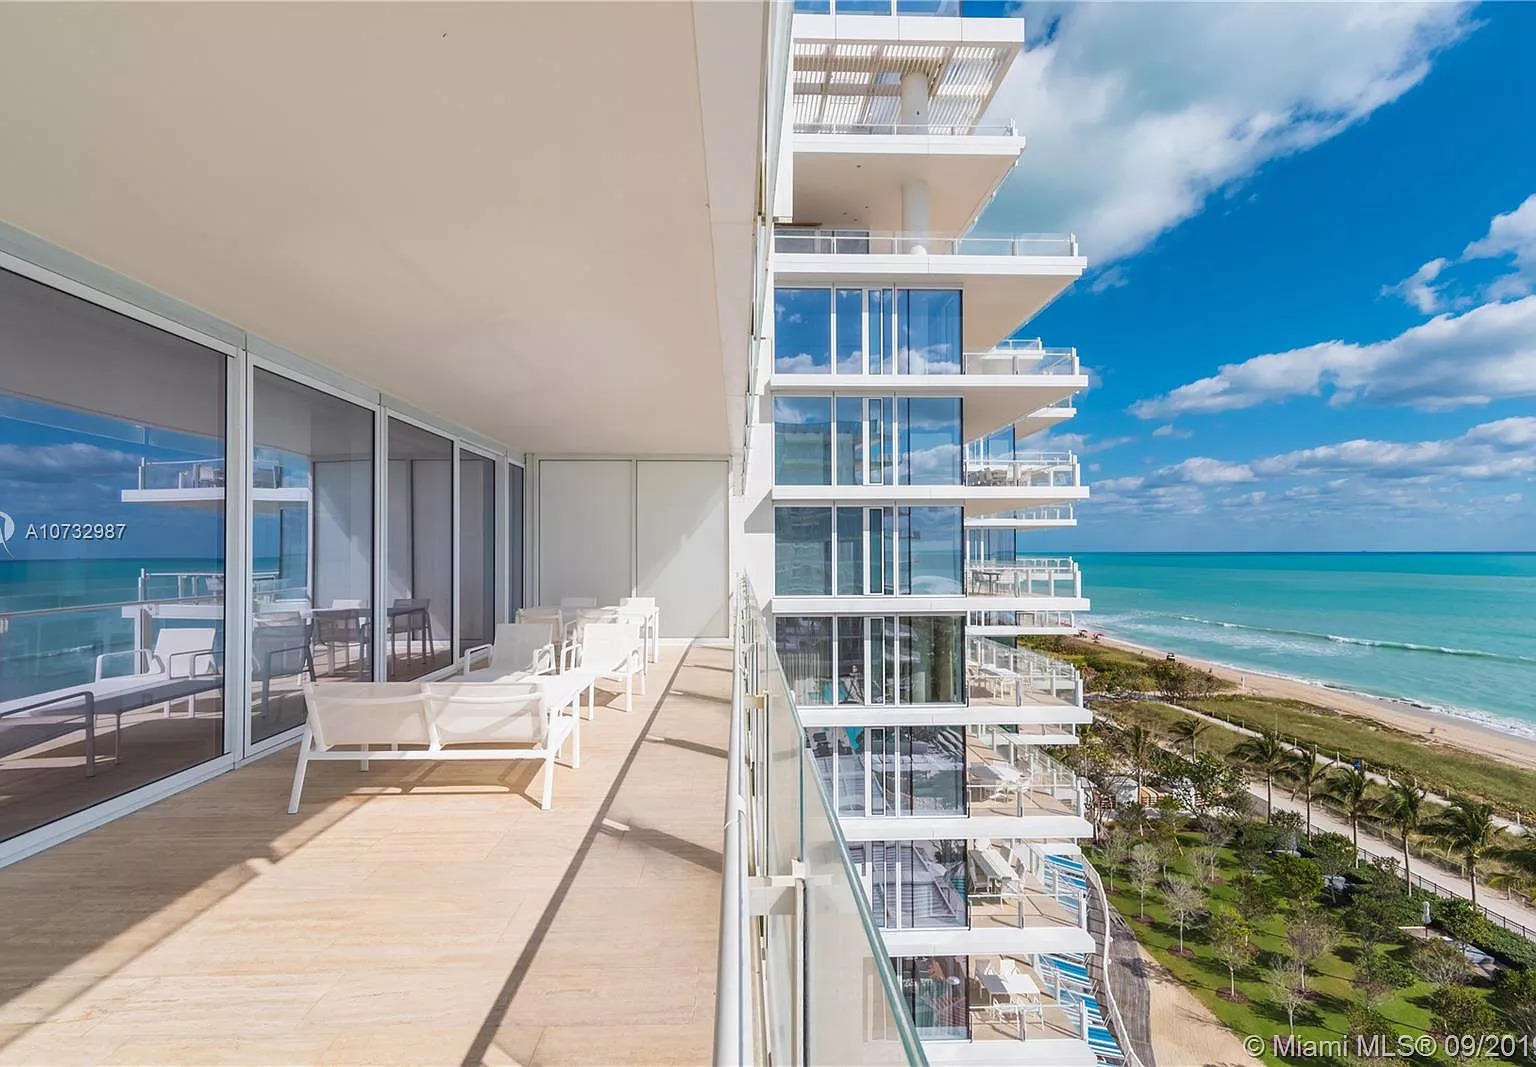 9111 Collins Ave UNIT N811, Surfside, FL 33154 - $6,250,000 home for sale, house images, photos and pics gallery